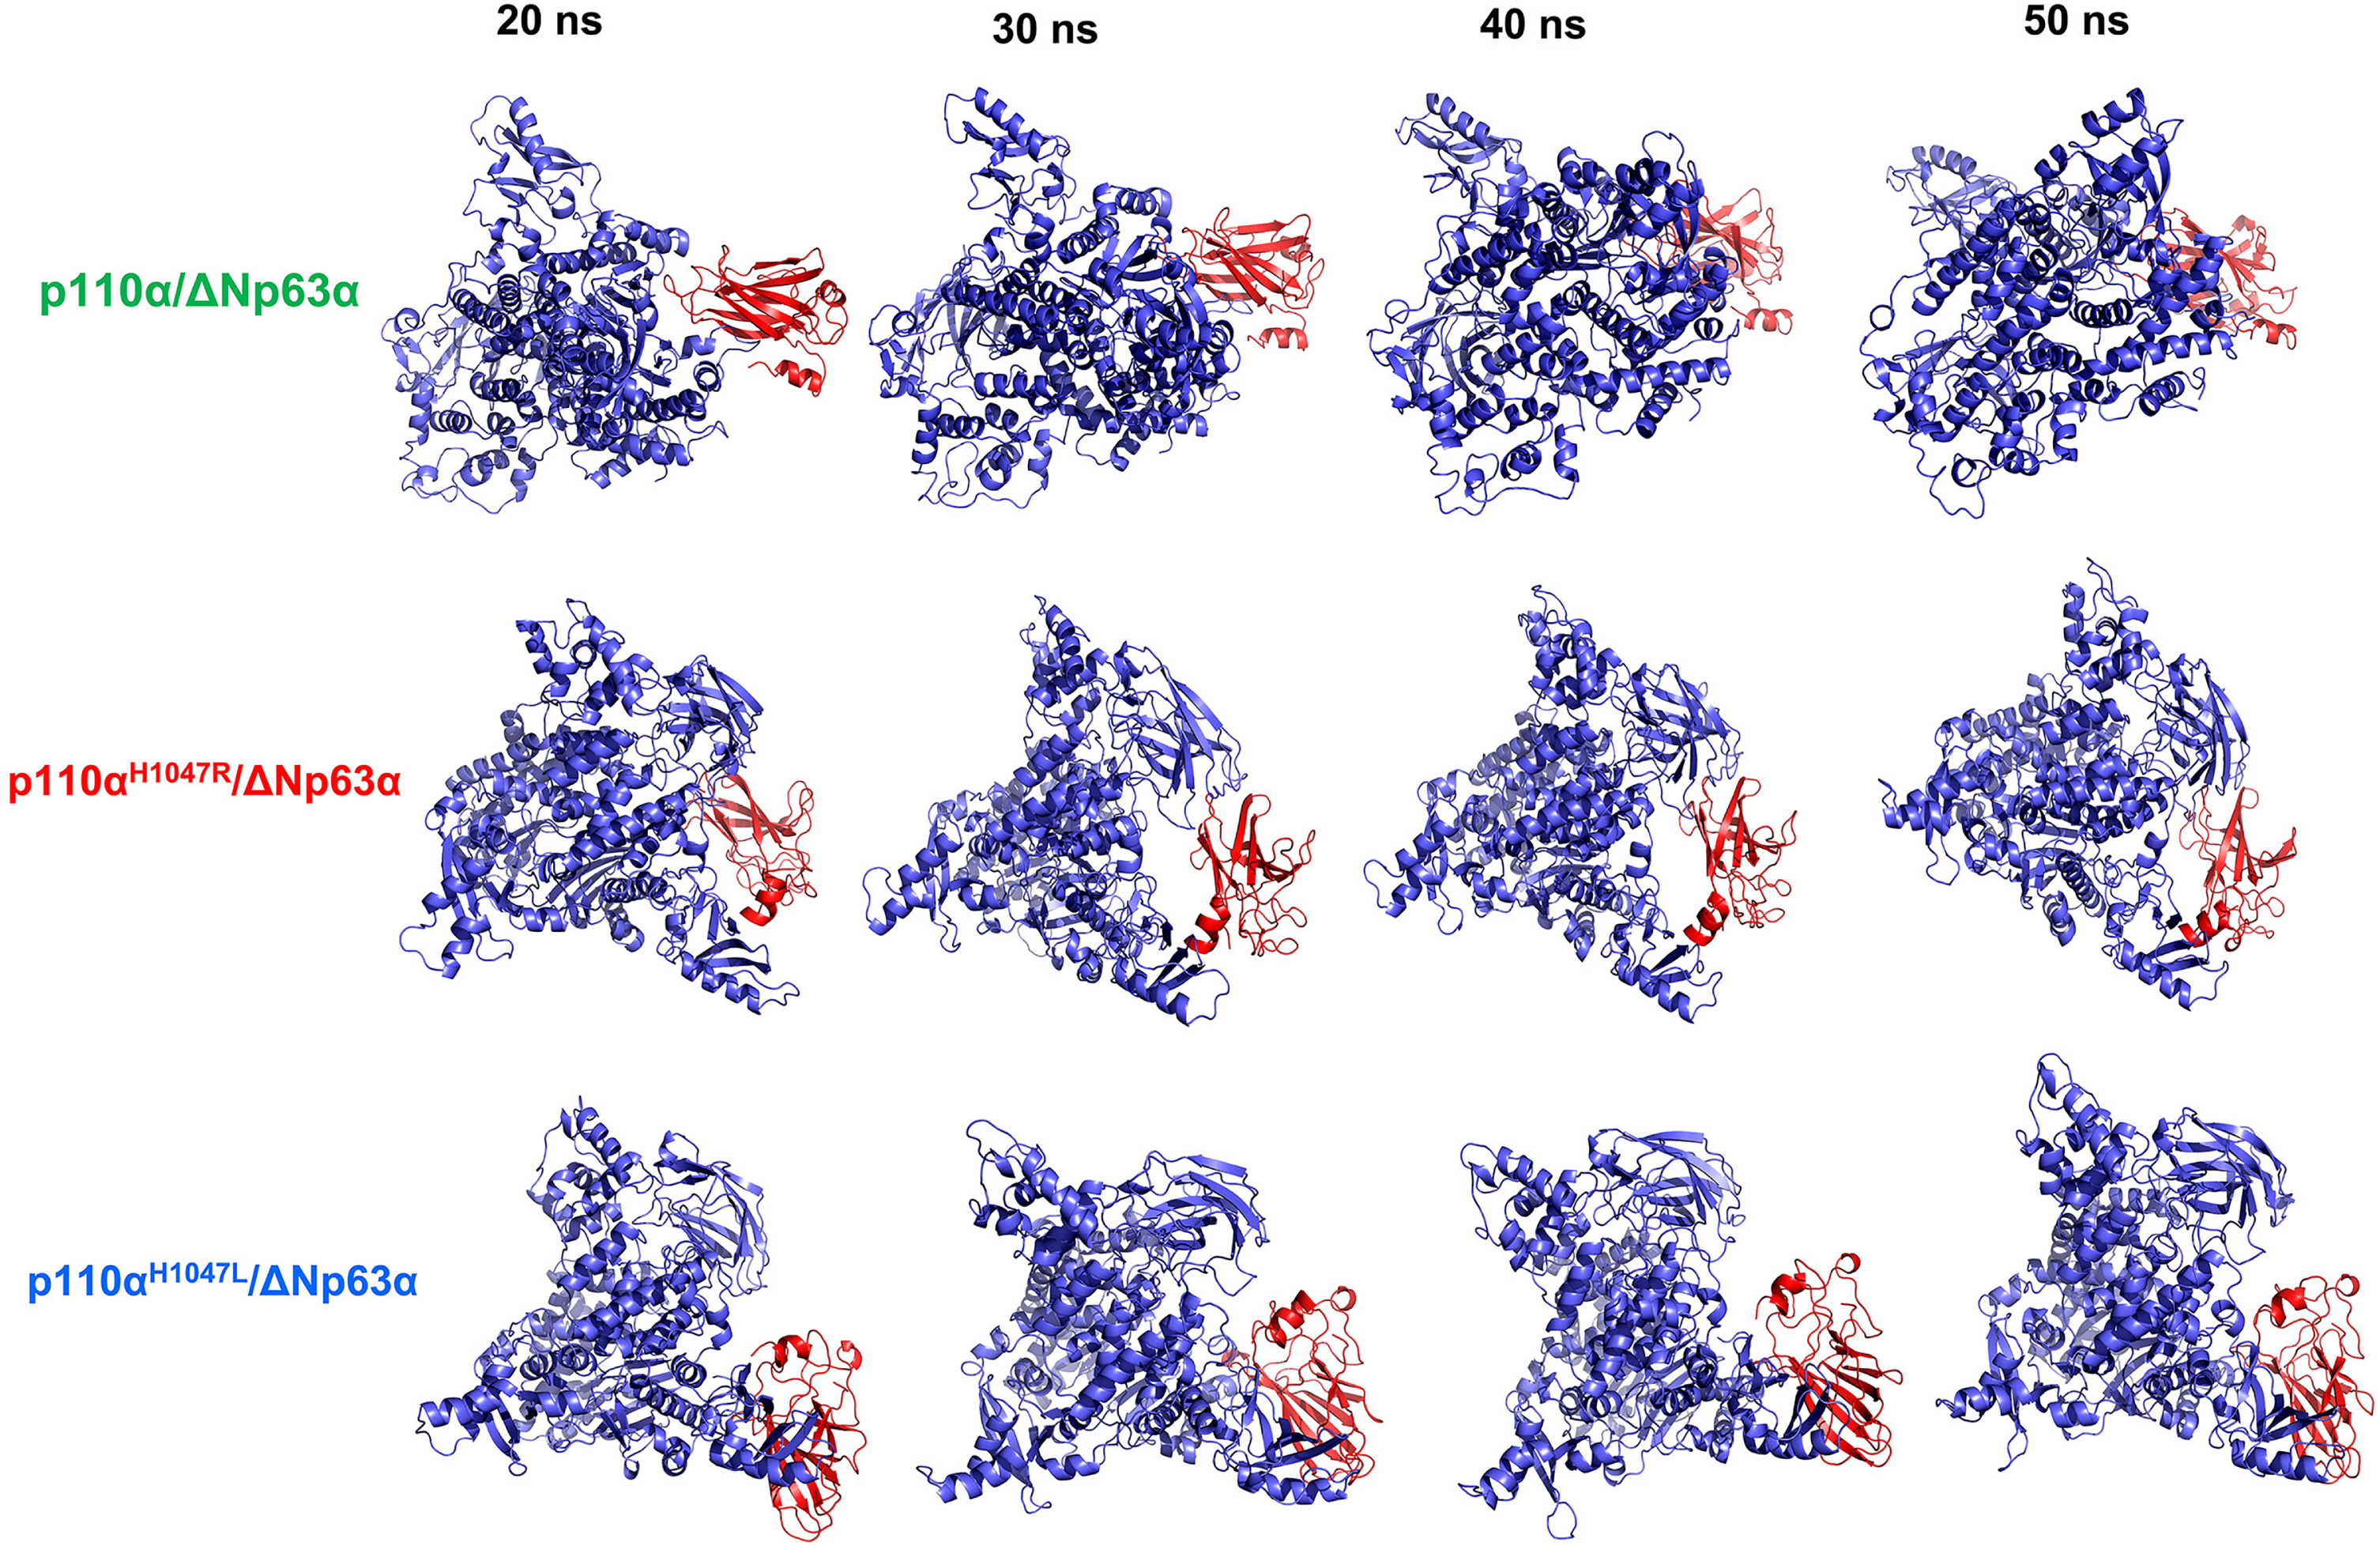 Stability of the tertiary structure of the wild-type (WT) and hotspot mutant forms of the p110α/ΔNp63α complex. The structures of the p110α (blue color) and ΔNp63α (red color) domains were derived from simulations of 20, 30, 40, and 50 ns. The ΔNp63α domain of the mutant forms showed increased interaction over various time intervals but showed differences in interaction sites compared to the WT.